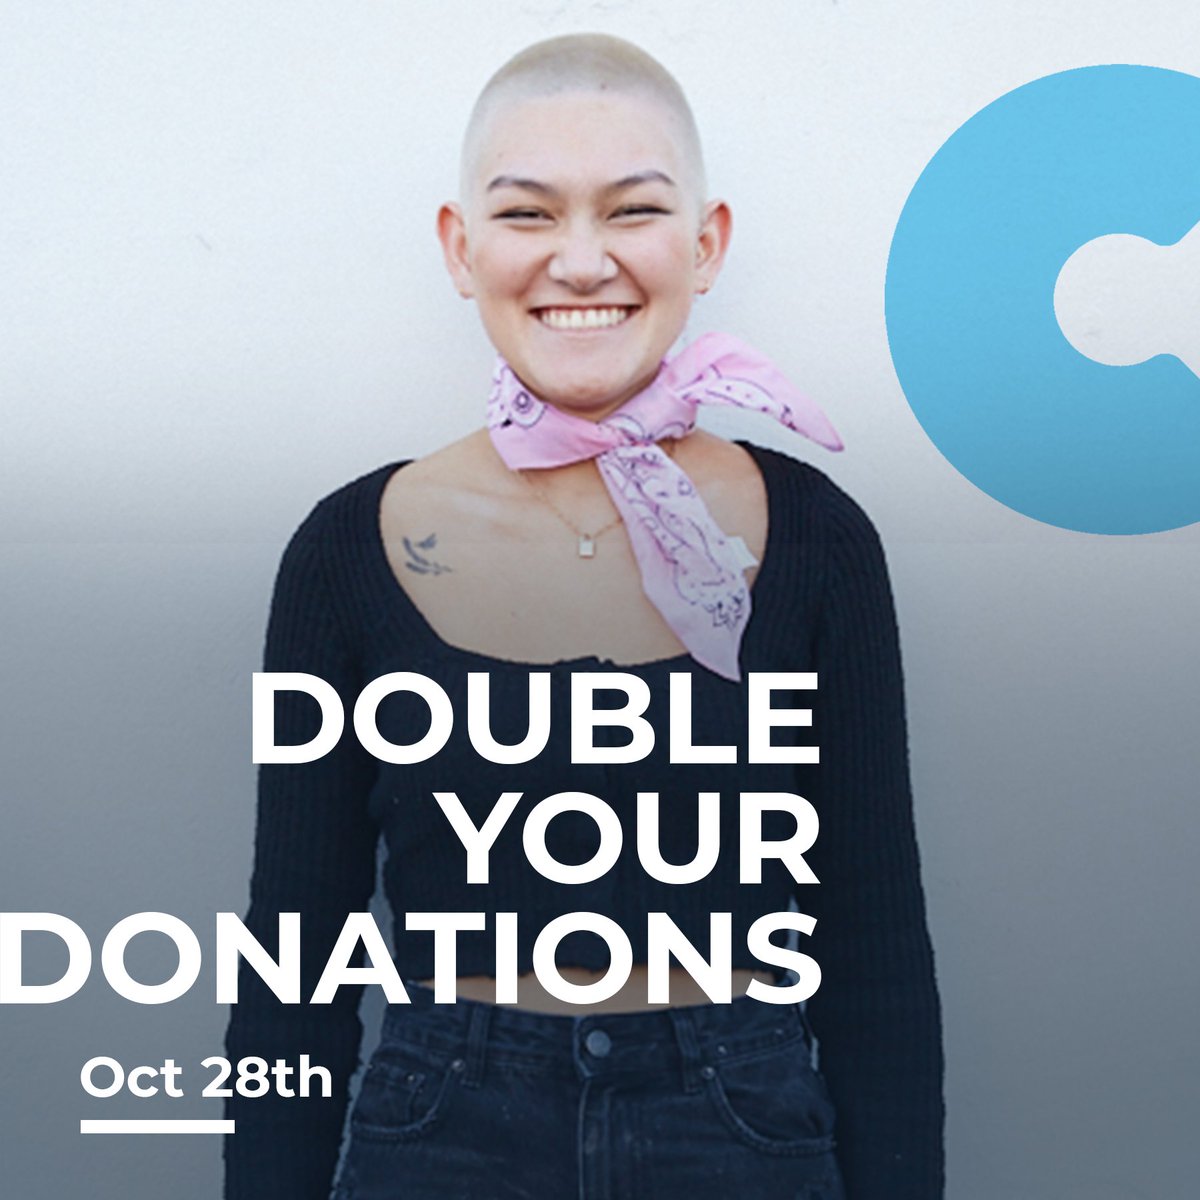 Double donations = double the impact 👊Your donations will be DOUBLED from 8AM on #GivingDay Fri 28 October, all thanks to our our generous partners #Chatime, @Hiltigroup and #PMAGlobal. Show your support and stand up to cancer 💚 Head to bit.ly/3V0Fe3X